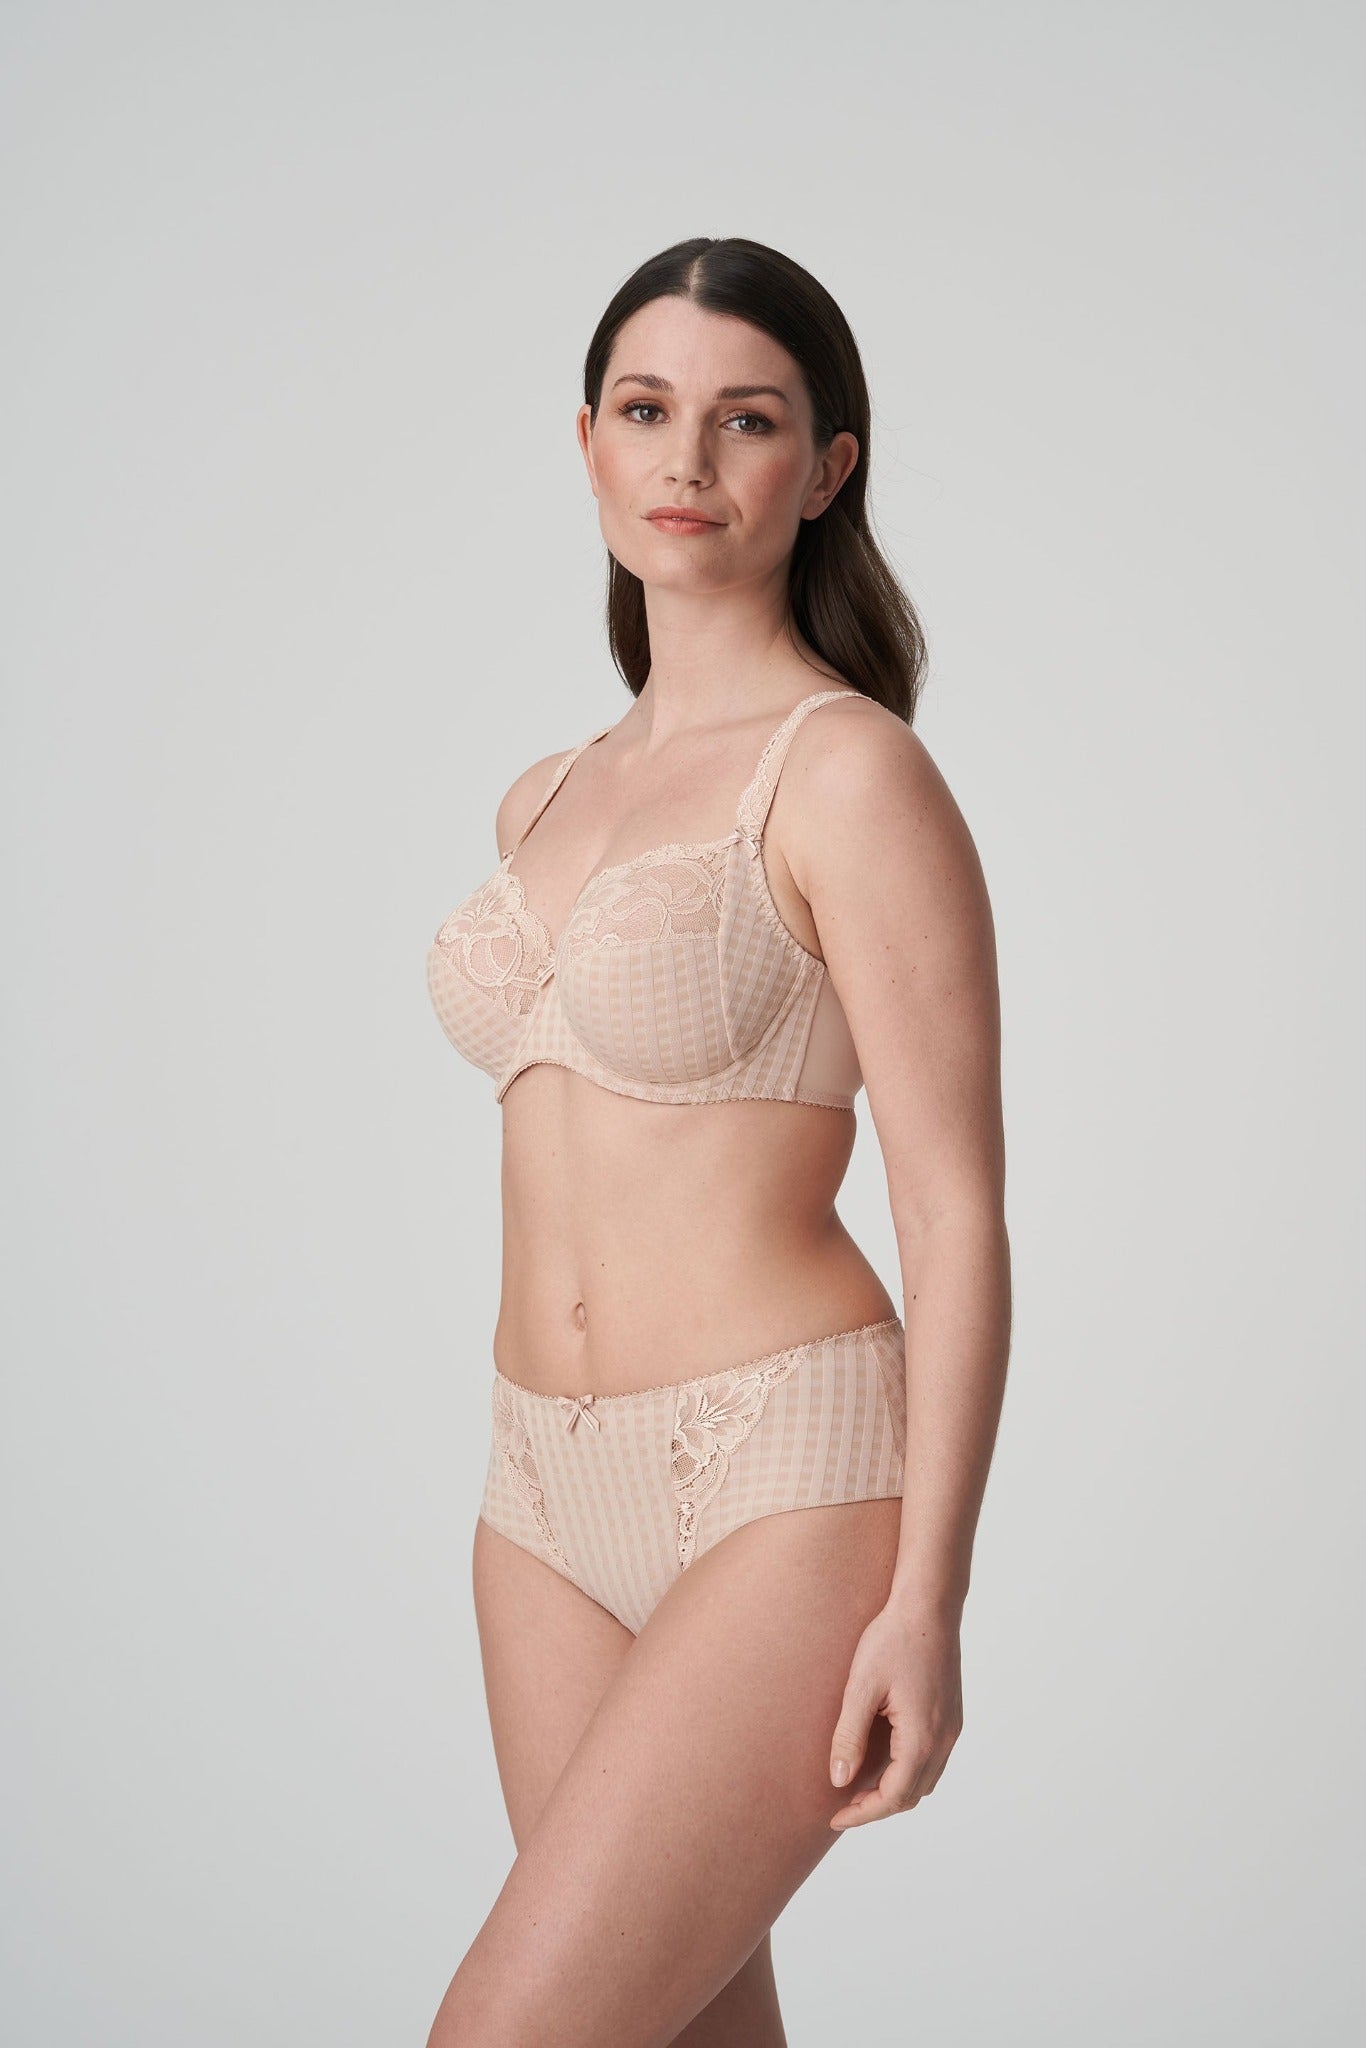 Side view of a woman wearing the DD+ Madison full cup bra in Caffe Latte by PrimaDonna.